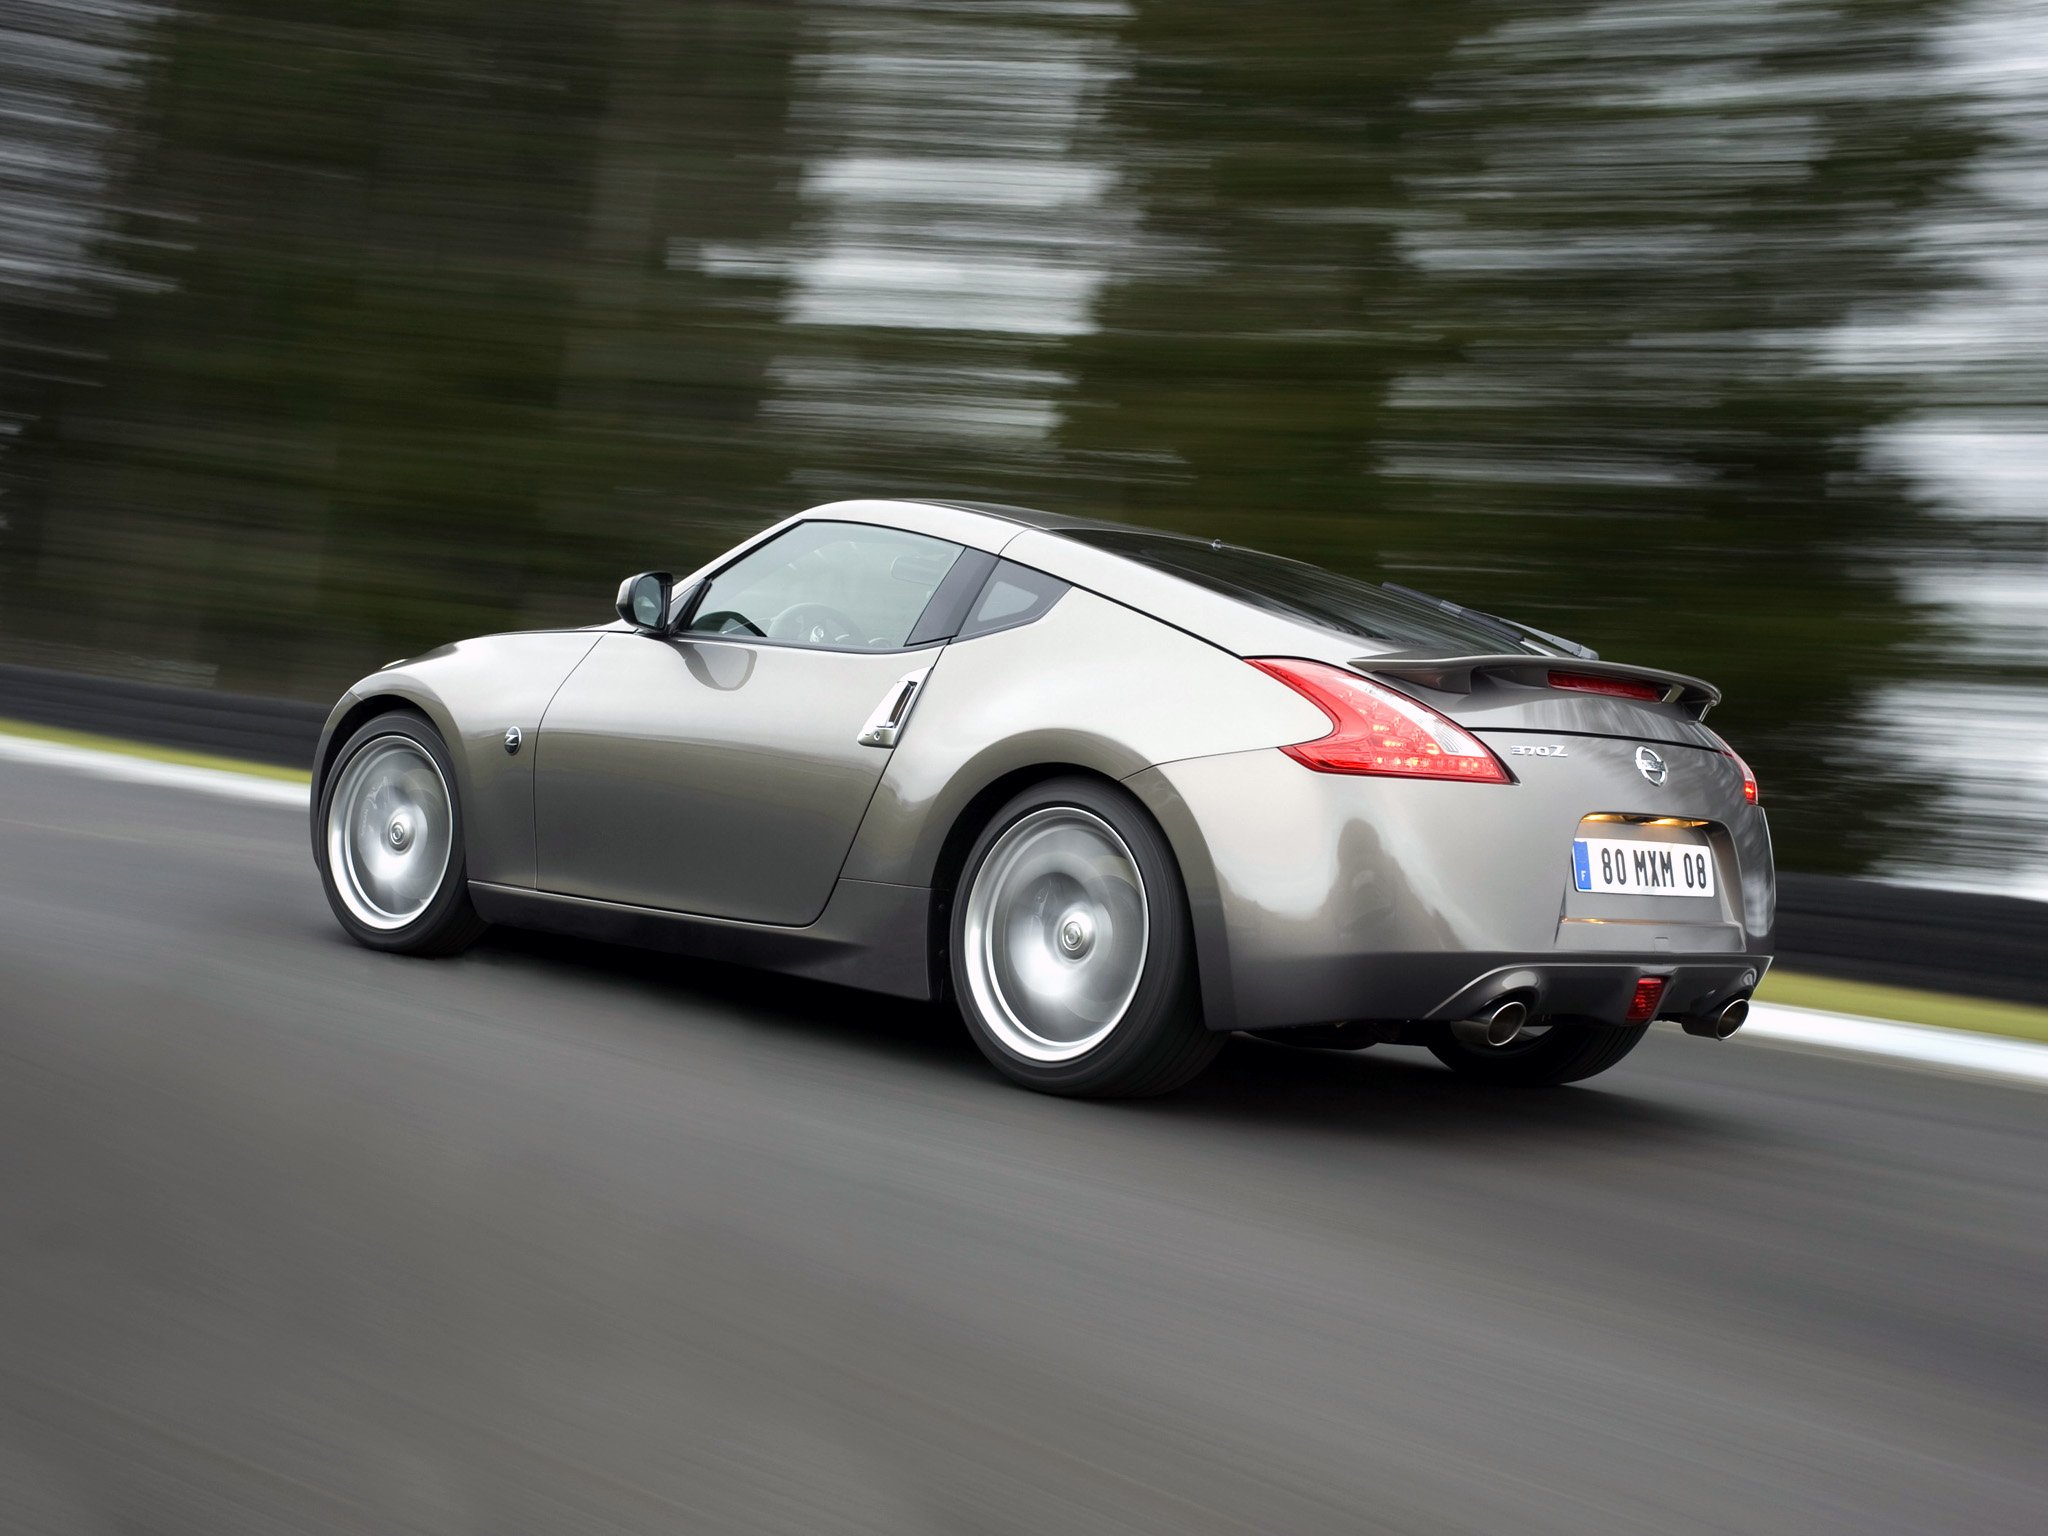 nissan, 370z, Cars, Coupe, 2009 Wallpaper